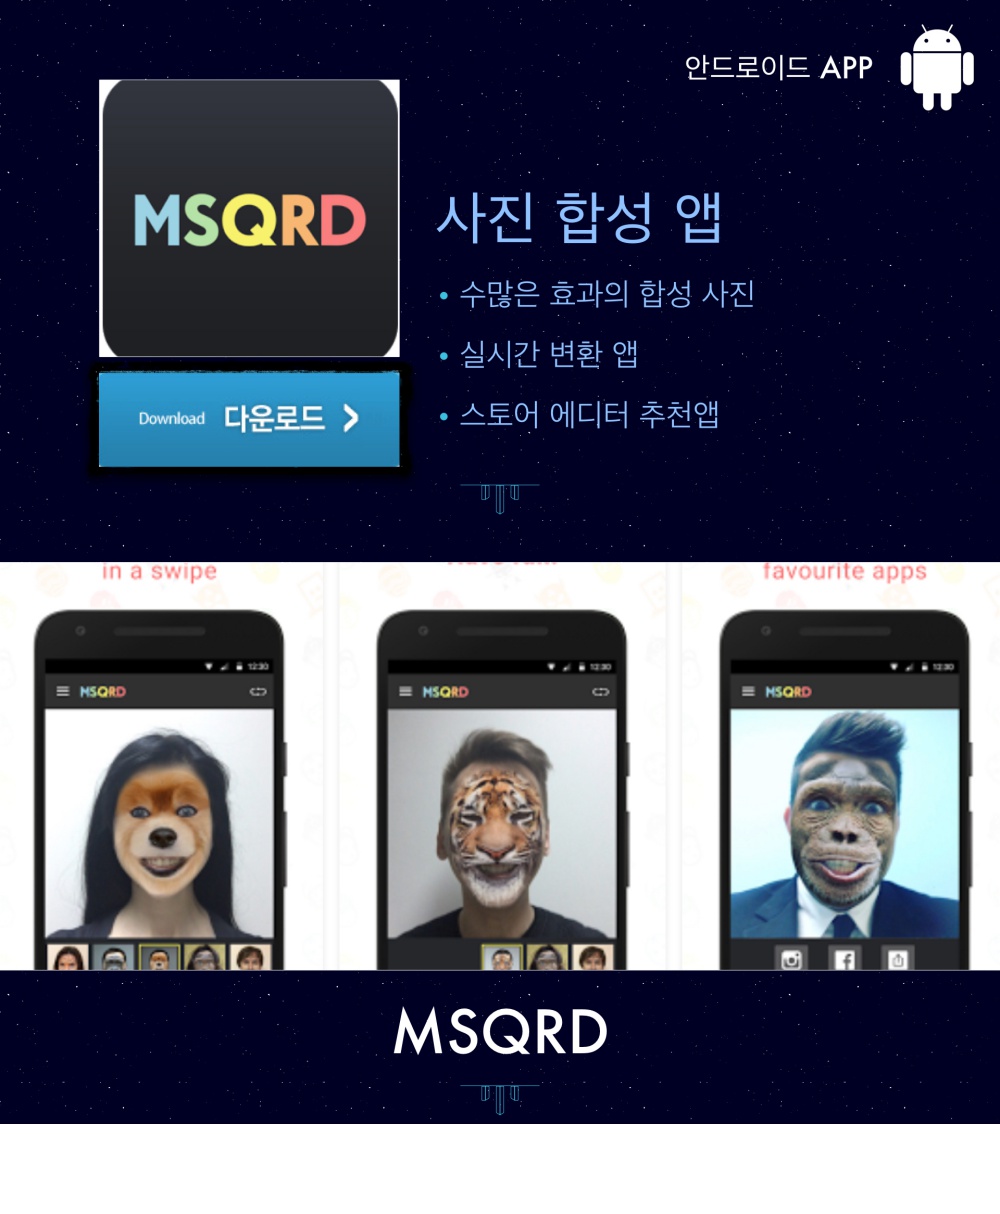 https://play.google.com/store/apps/details?id=me.msqrd.android